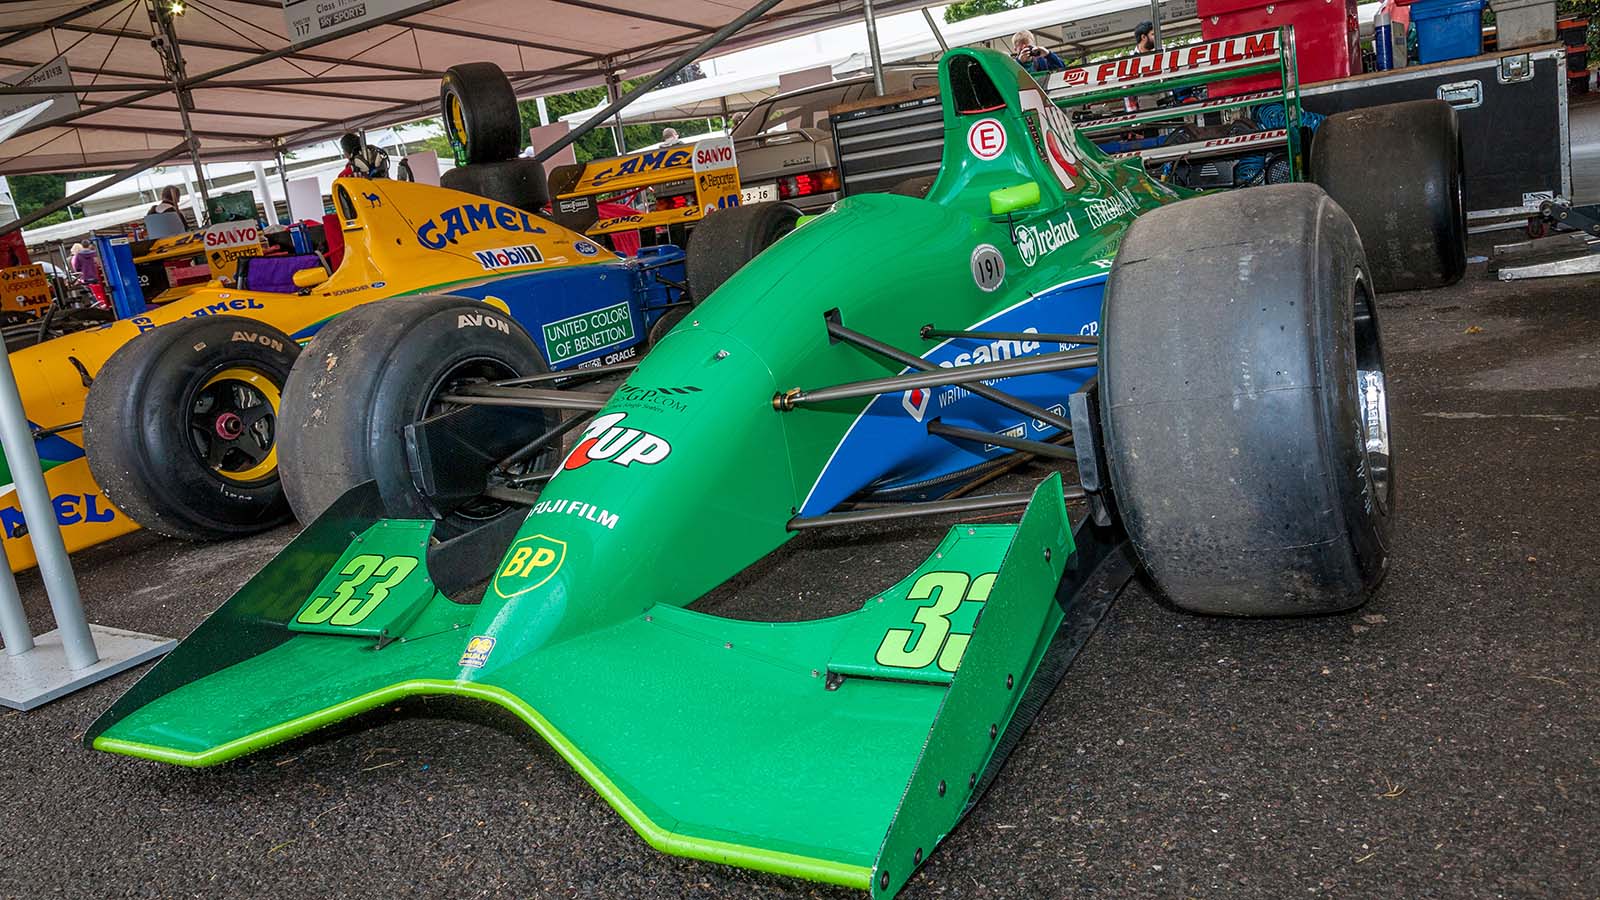 1991 Jordan-Ford 191 F1 car in the paddock at the 2014 Goodwood Festival of Speed, Sussex, UK.